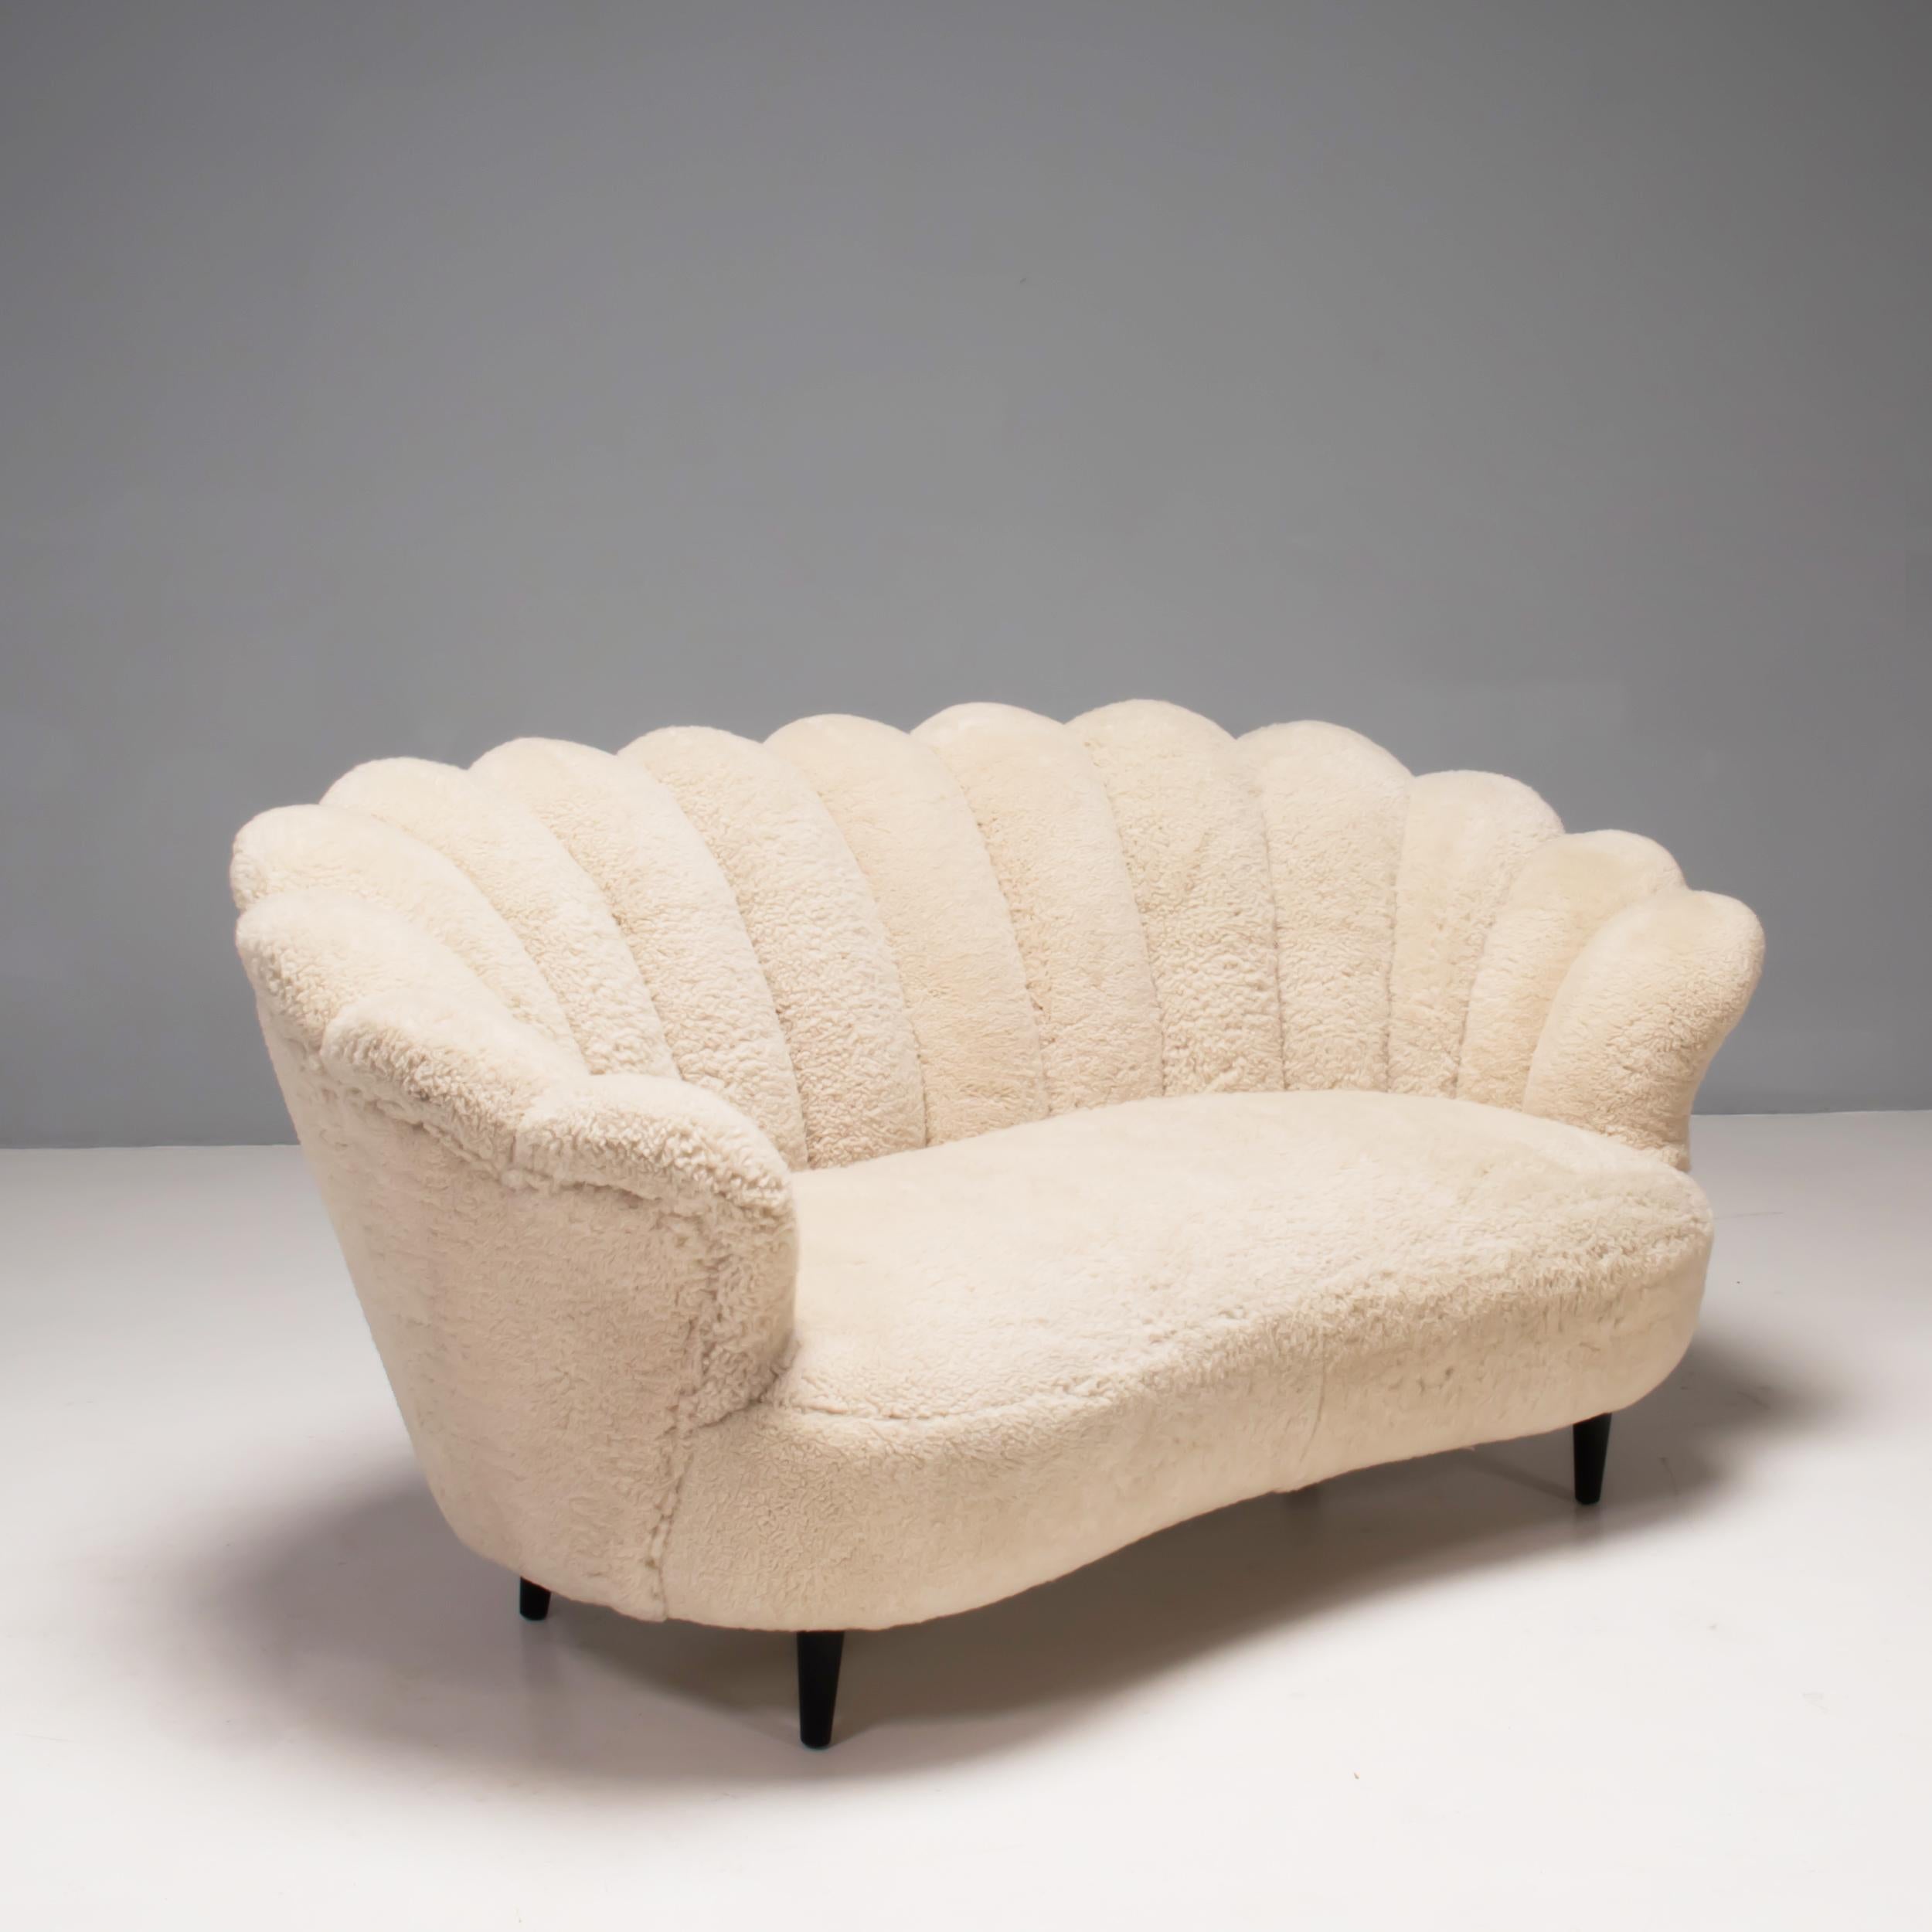 A beautiful vintage tub Danish Art Deco sofa in the manner of architect Flemming Lassen, this sofa features a scalloped backrest, which curves around the sides of the chair, enveloping and comfortable.

Fully recently upholstered in genuine cream